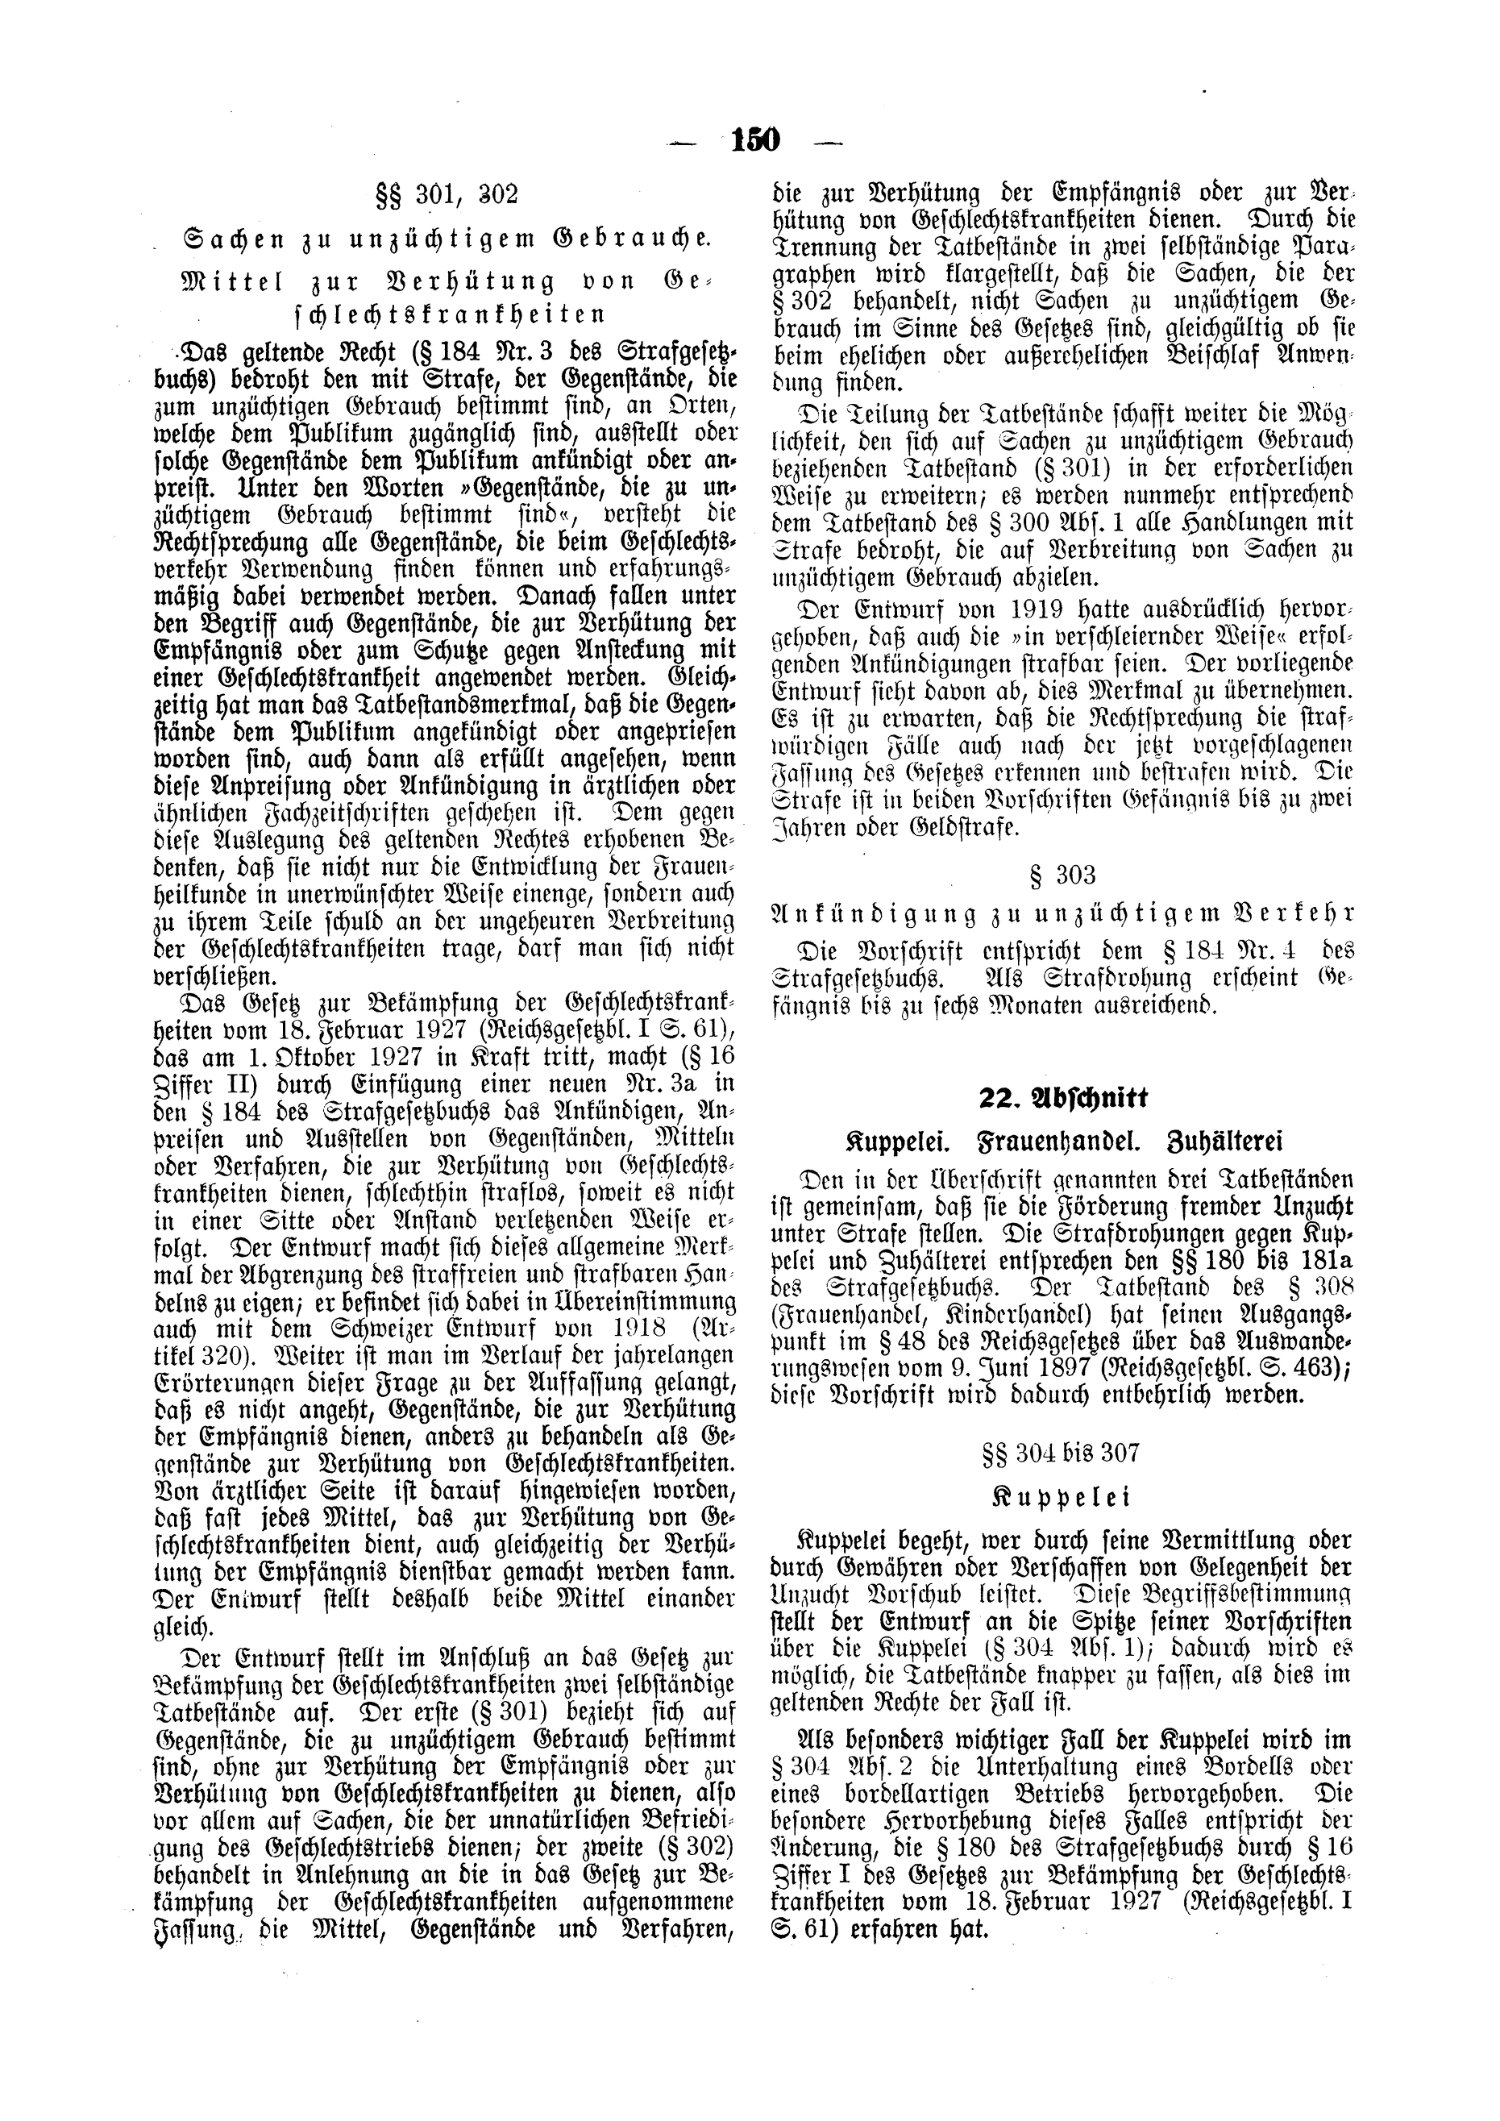 Scan of page 150